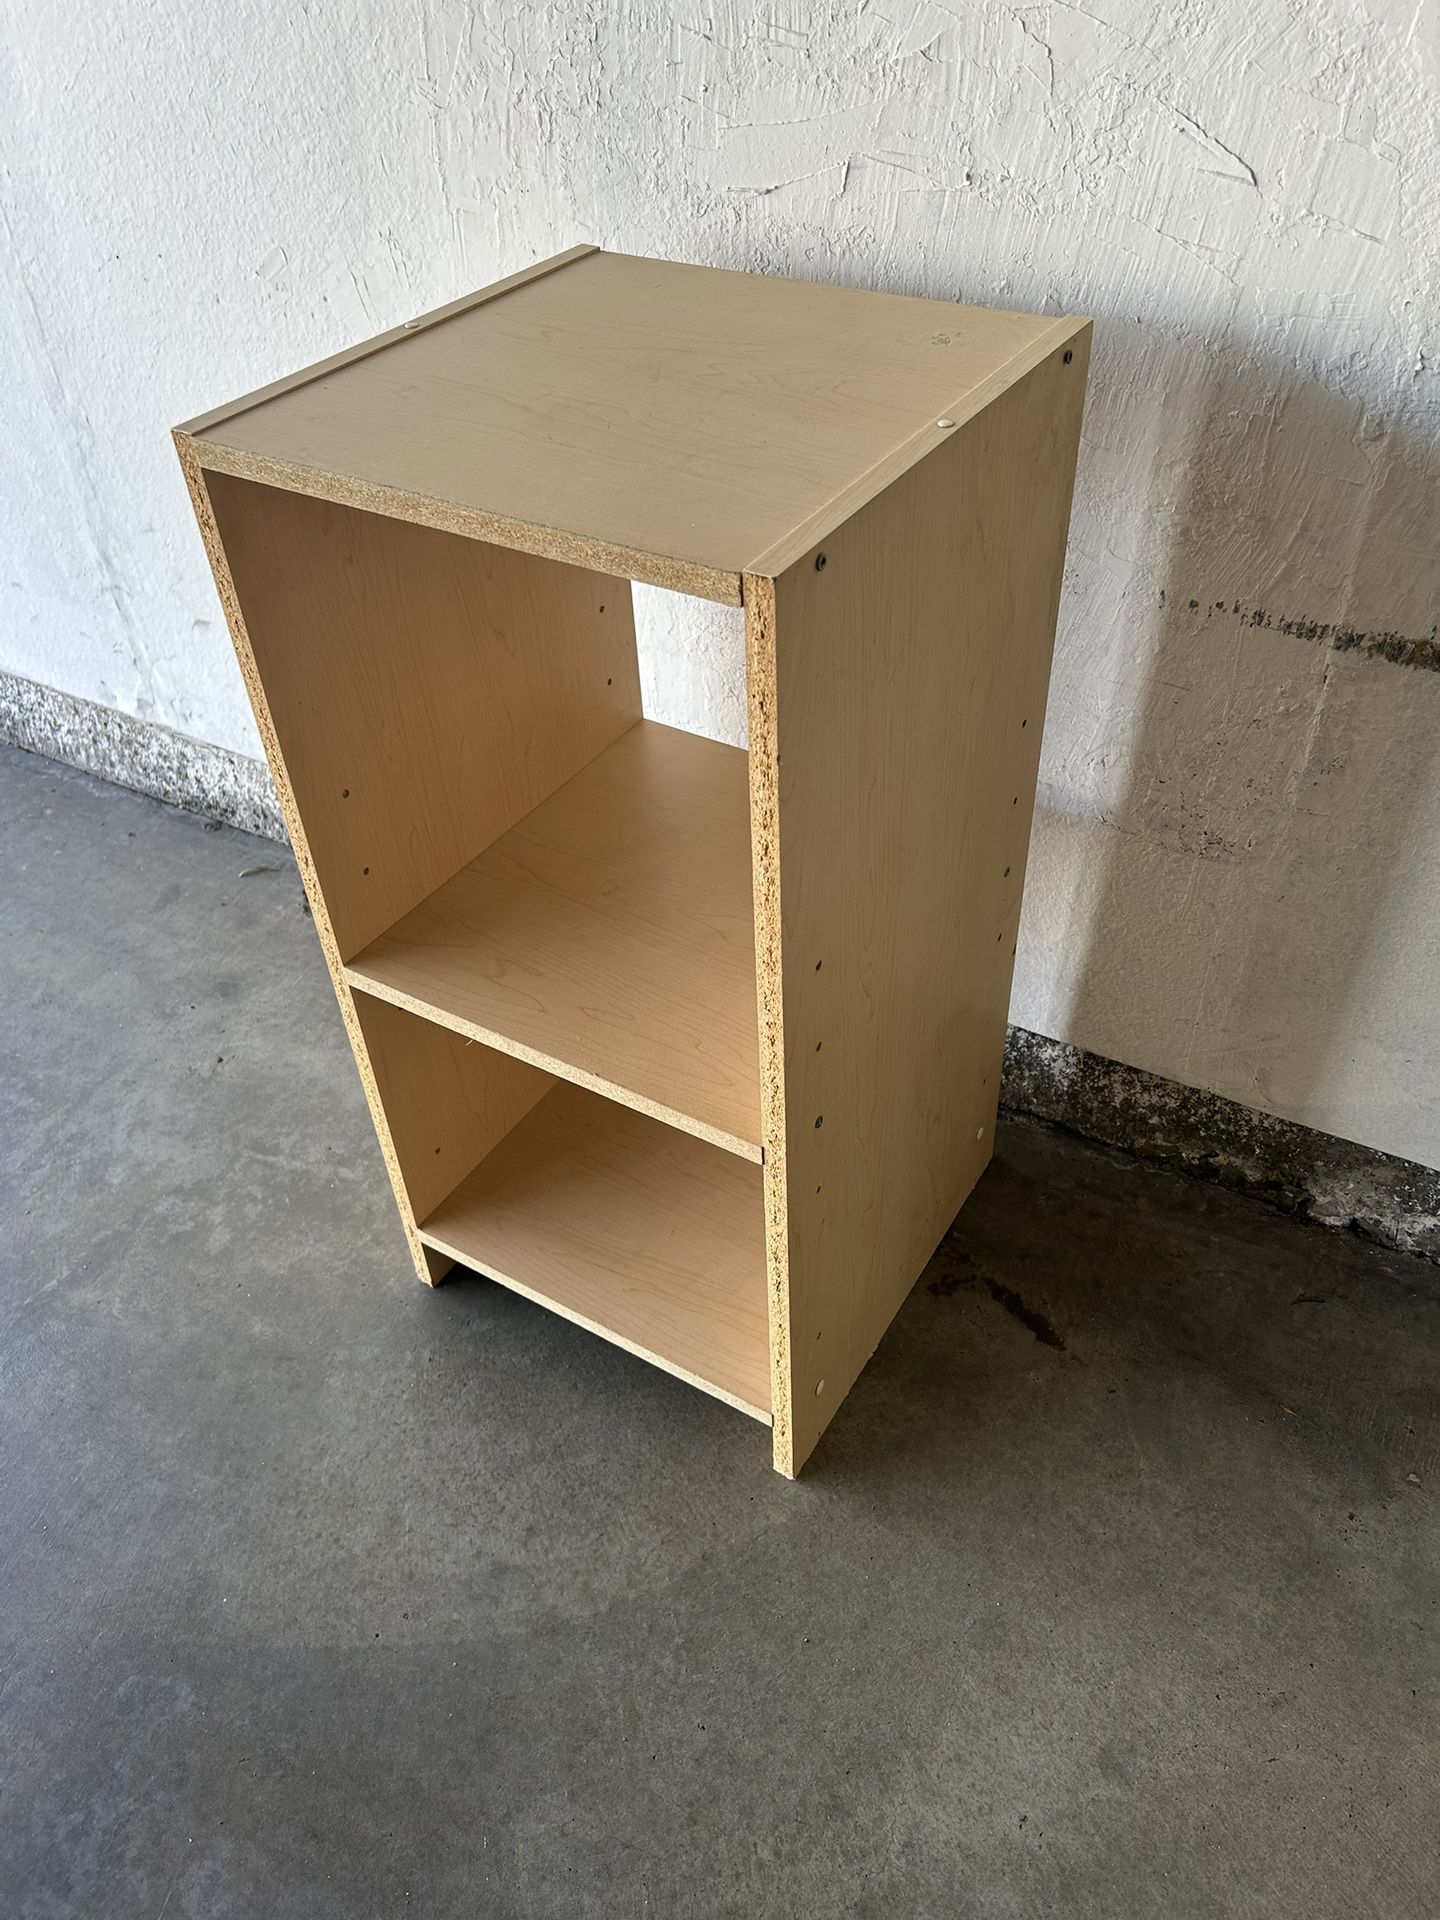 Small Bookshelf Table With Storage Space 